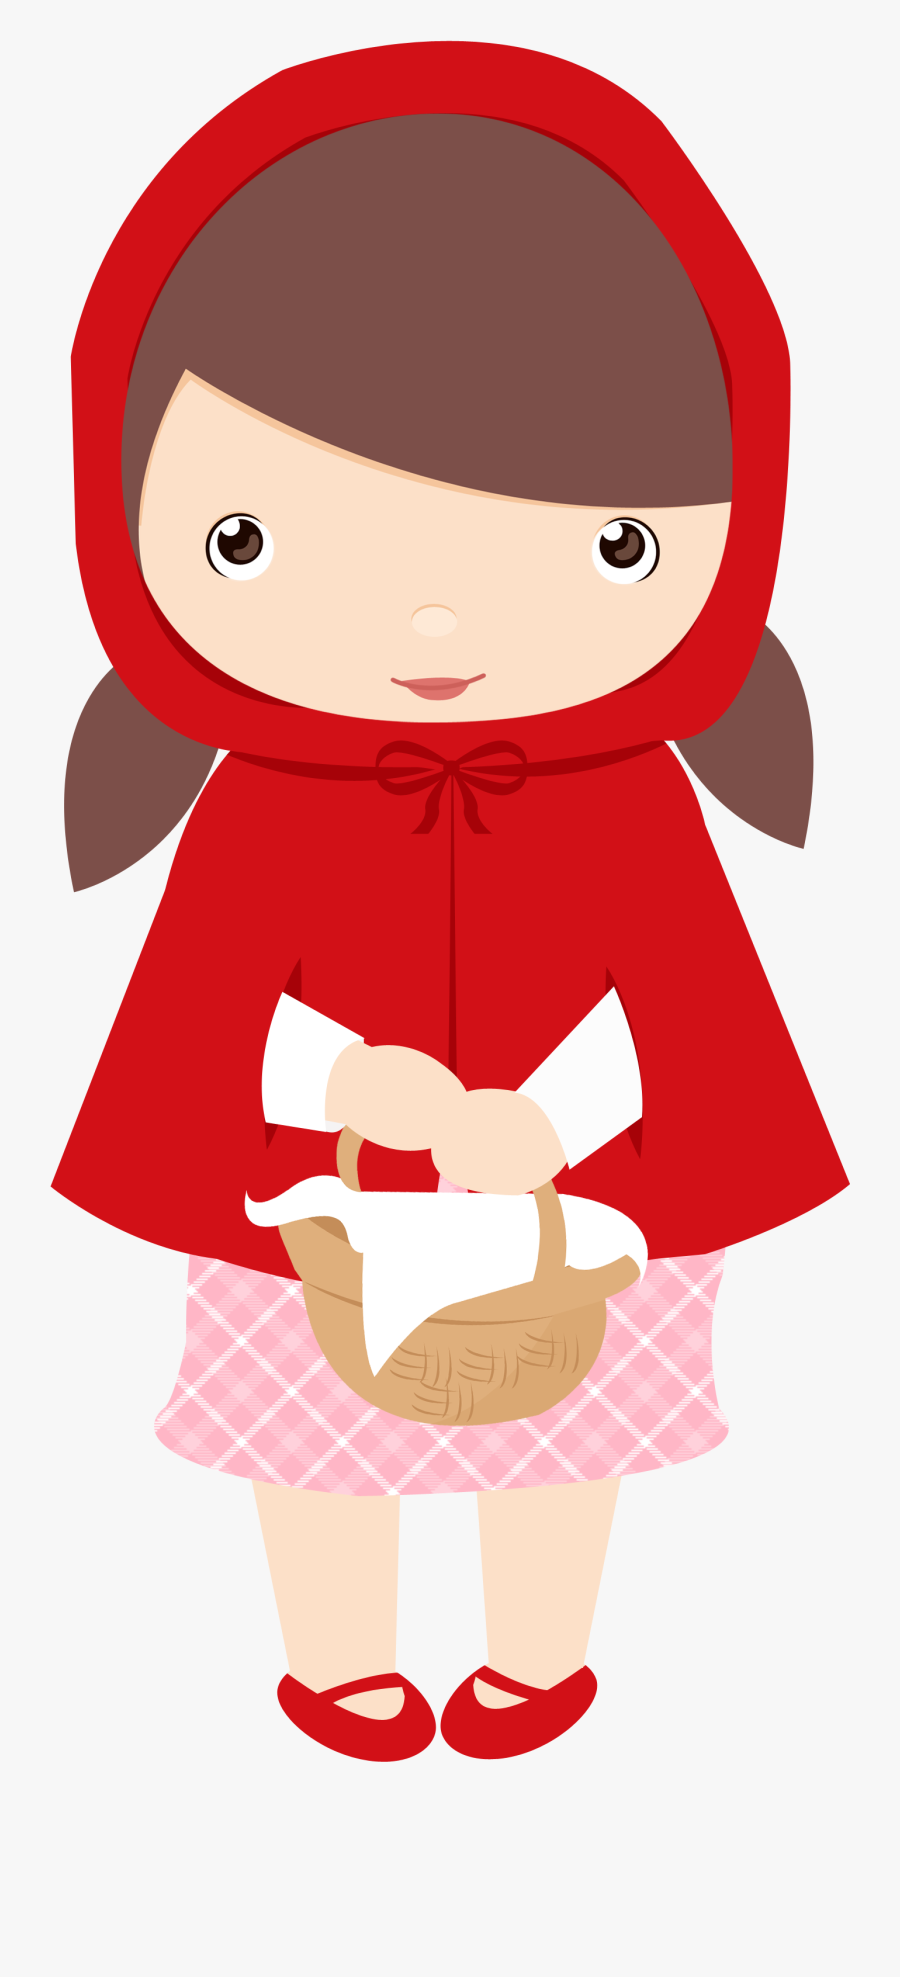 Wolf Clipart Red Riding Hood - Little Red Riding Hood .png, Transparent Clipart